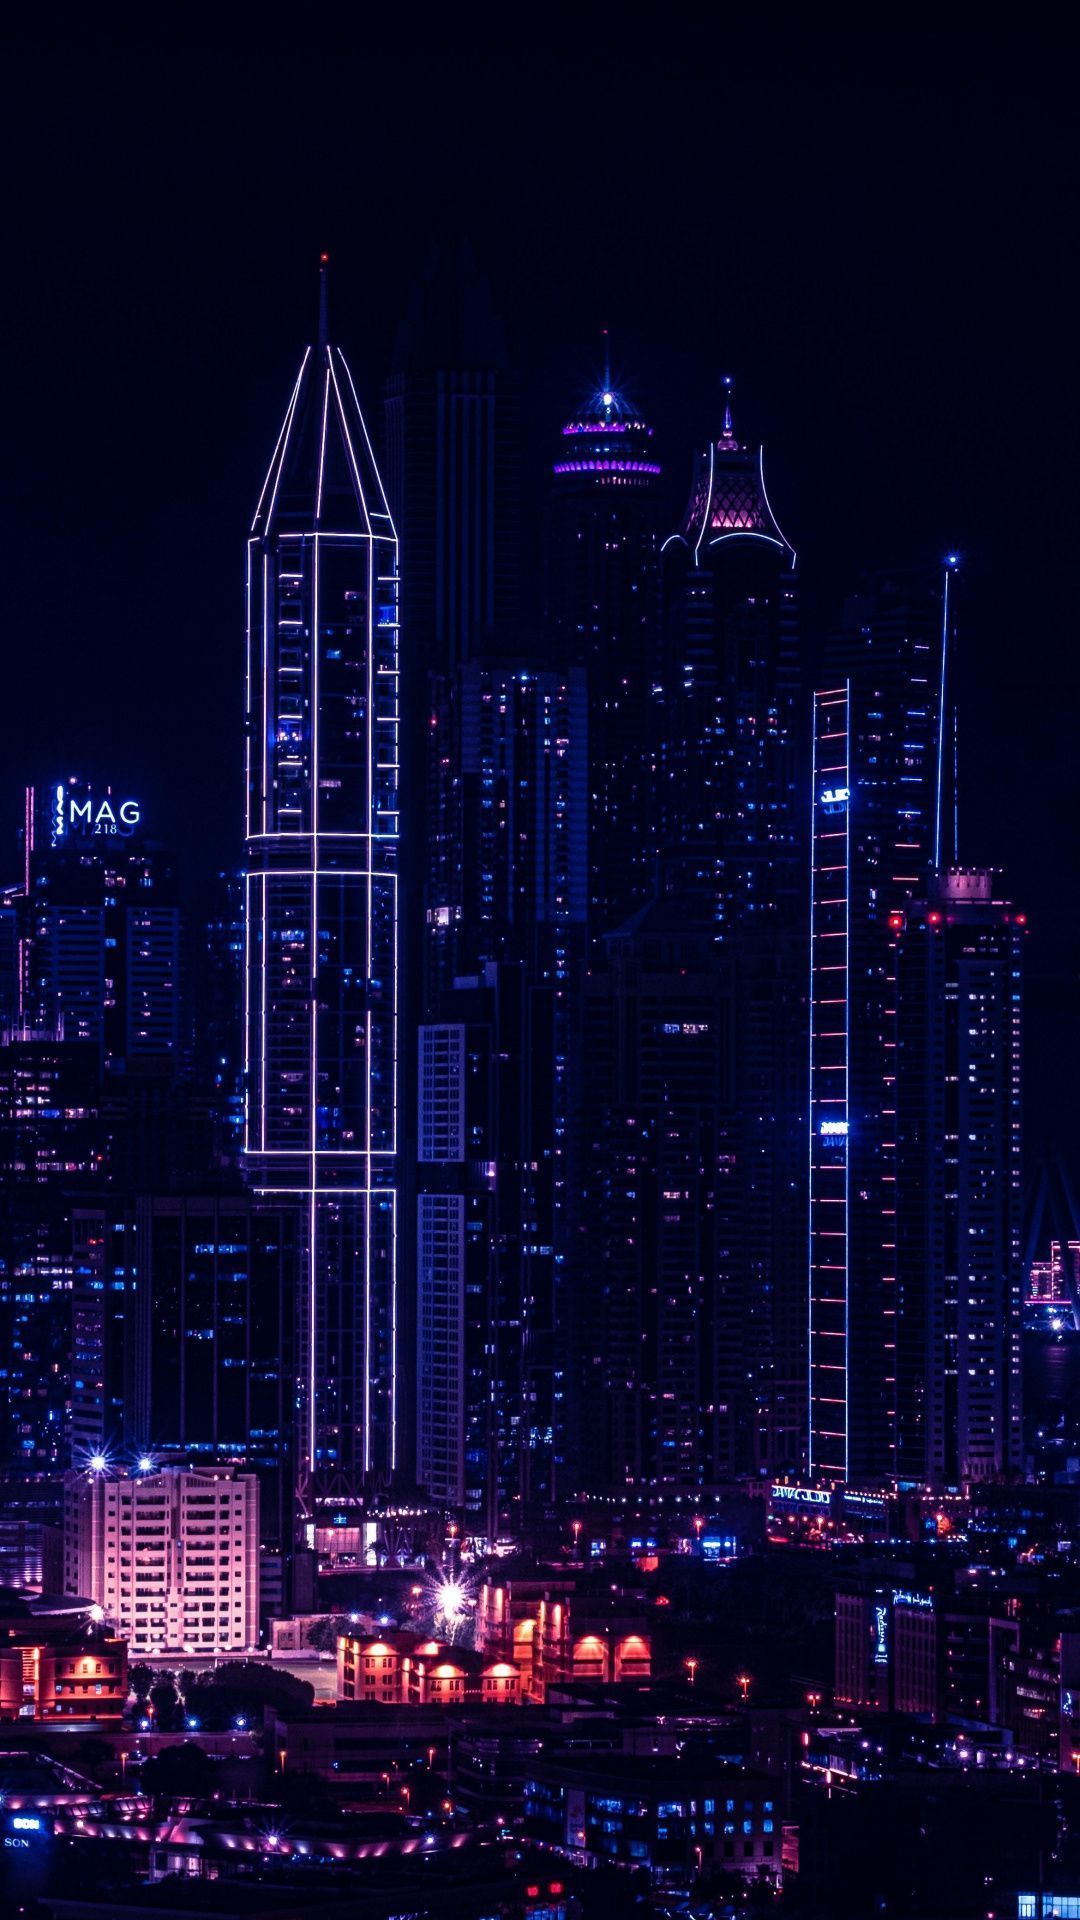 City, night, lights of buildings, cityscape wallpaper. Cityscape wallpaper, Building aesthetic, City wallpaper